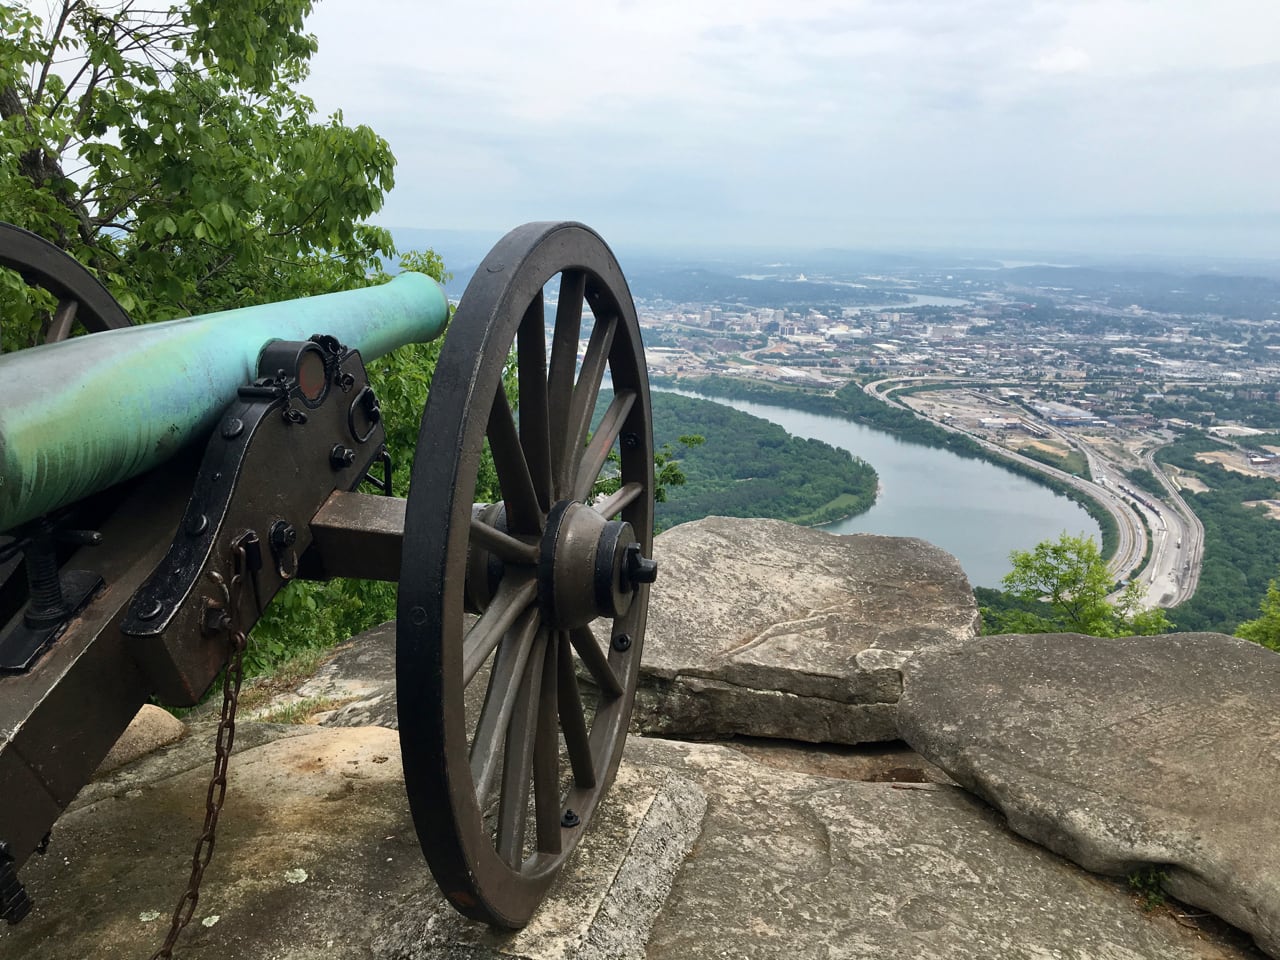 The view from Point Park on Lookout Mountain